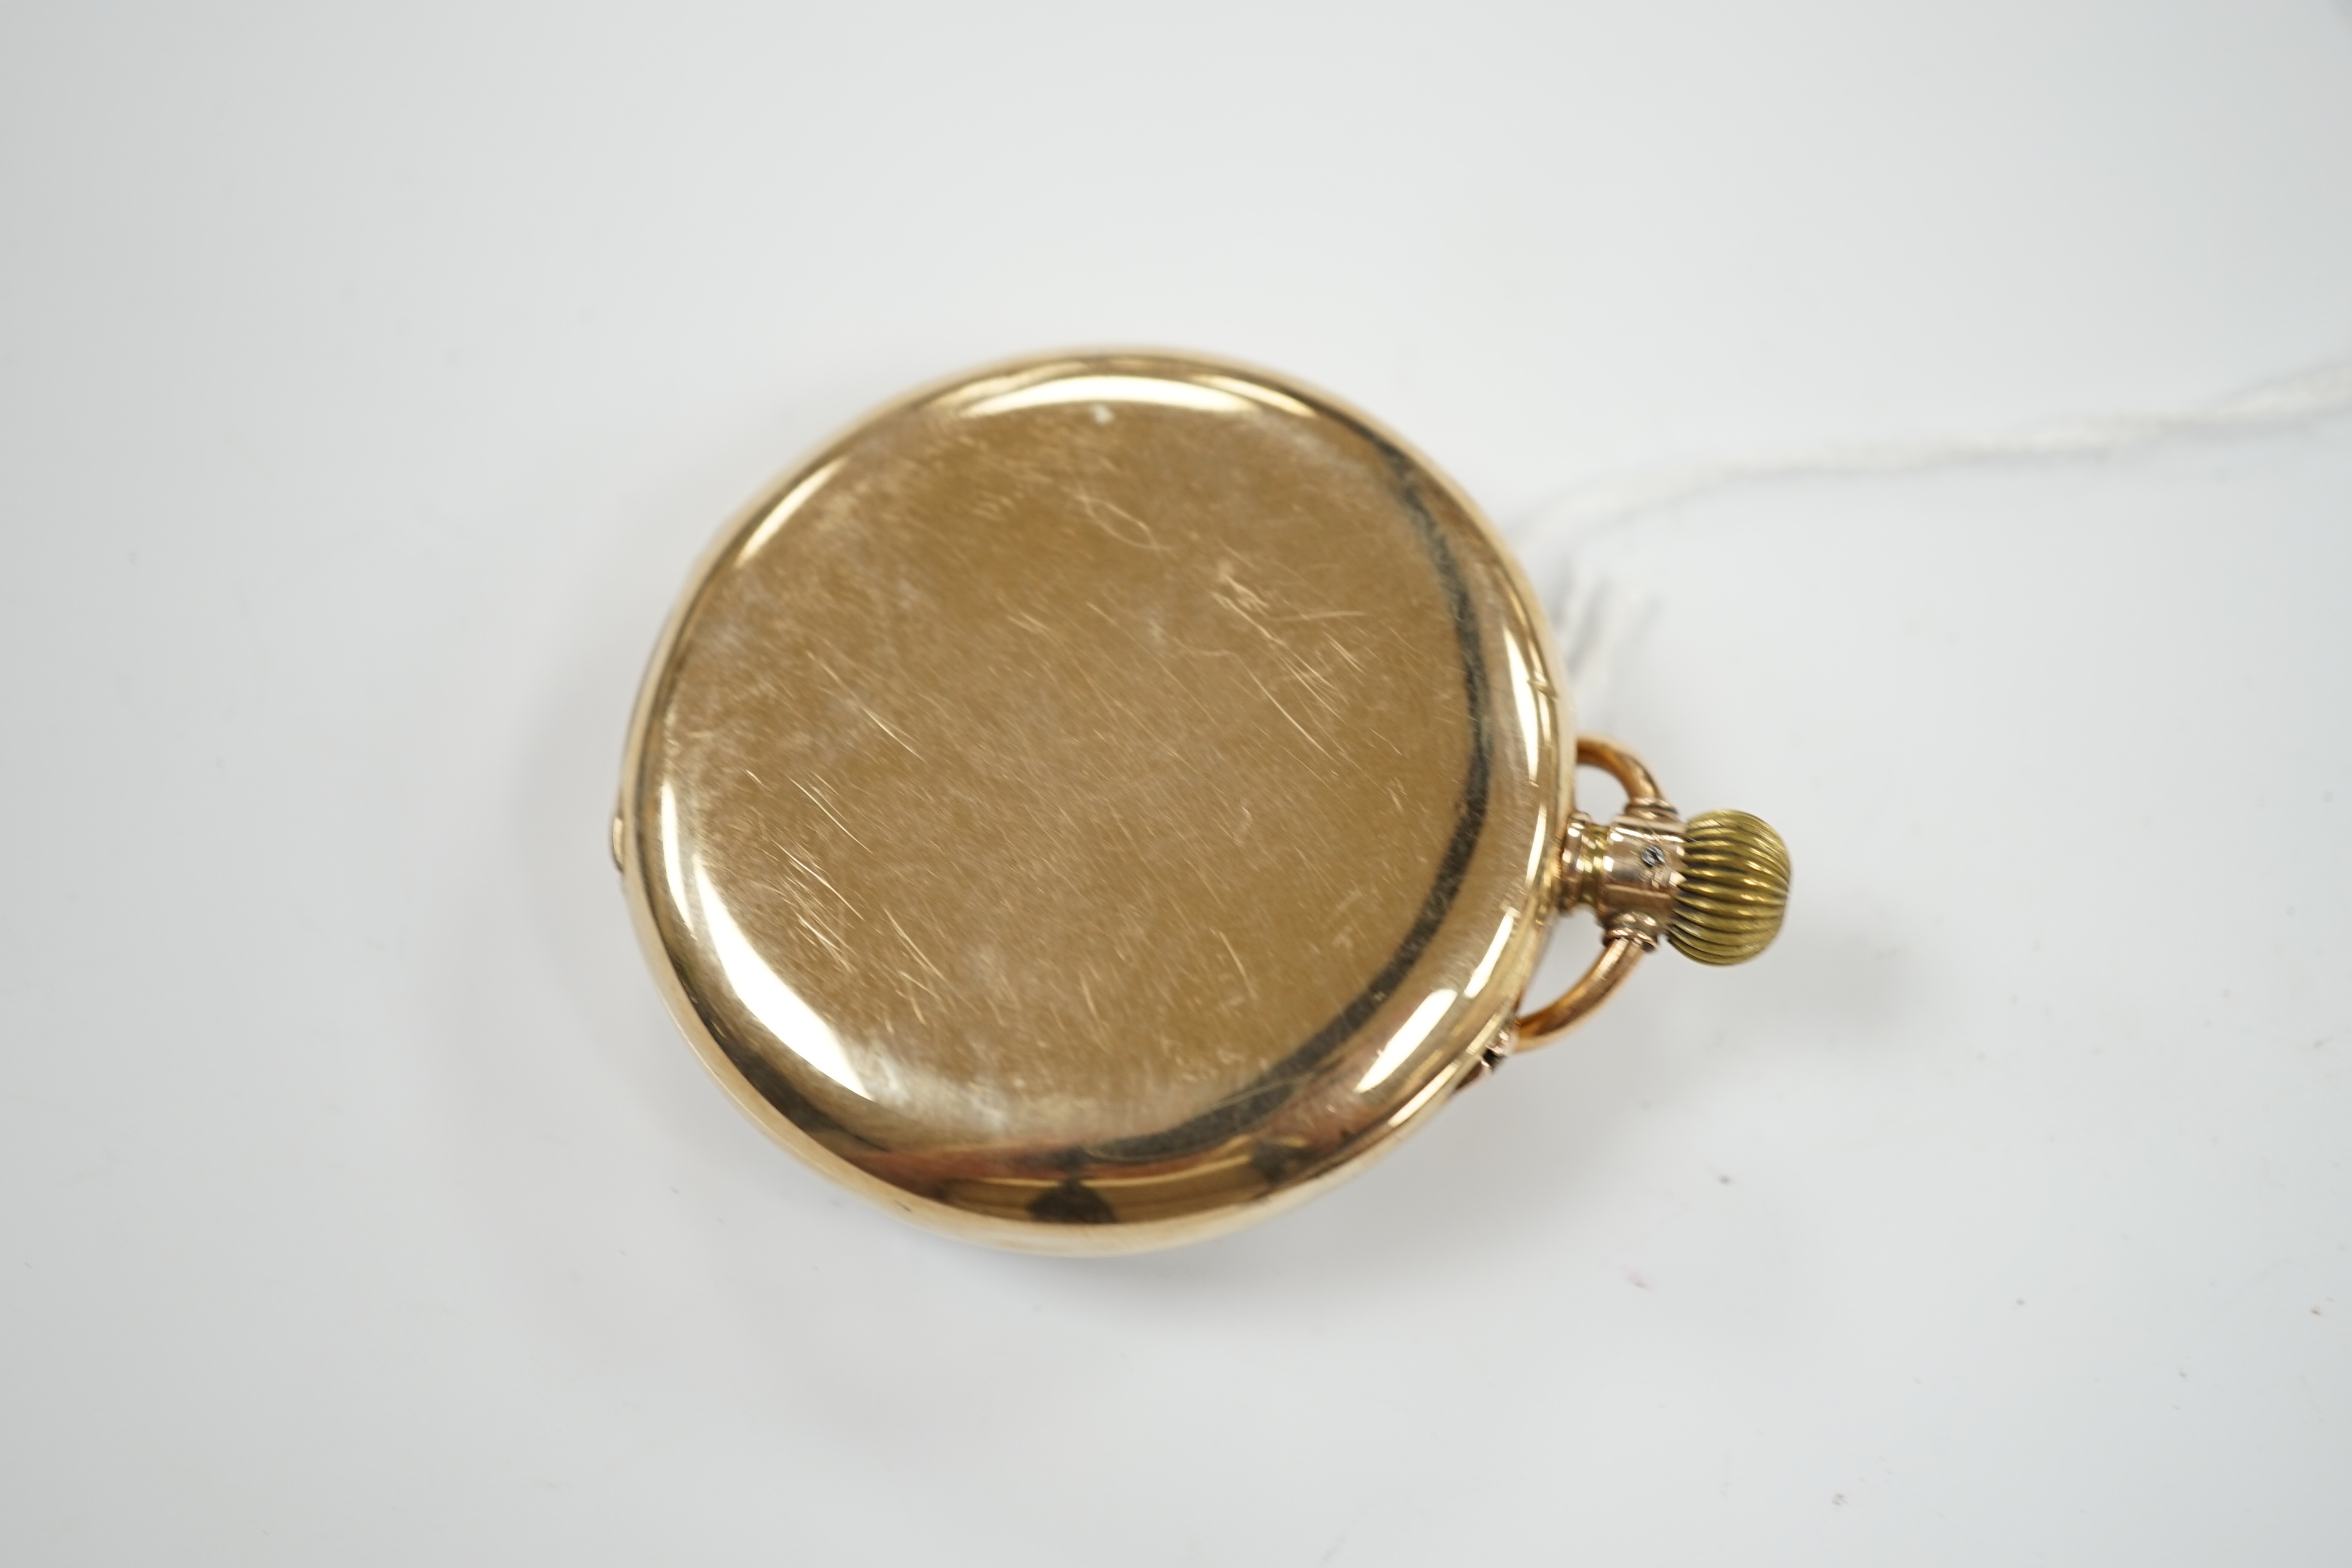 A George V 9ct gold open face keyless pocket watch, with Roman dial and subsidiary seconds, case diameter 50mm, gross weight 83.4 grams.